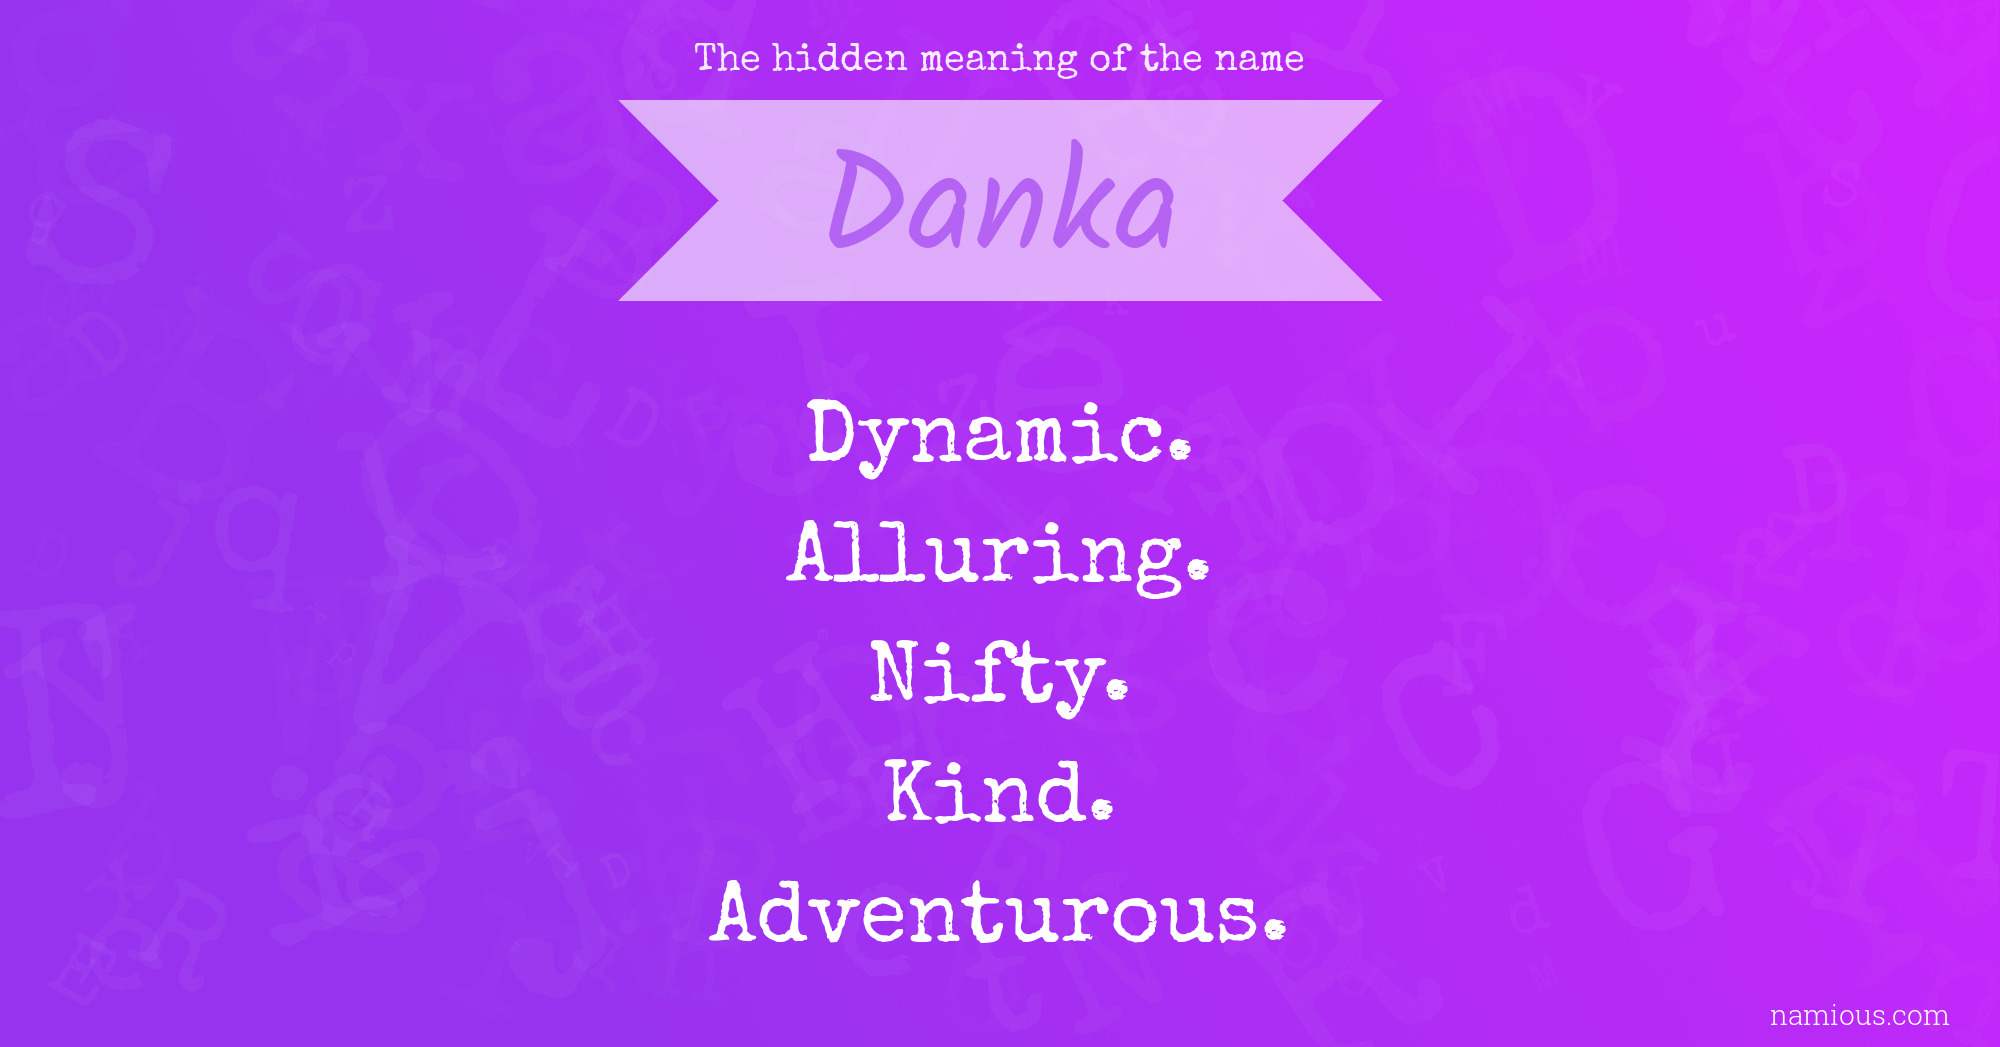 The hidden meaning of the name Danka